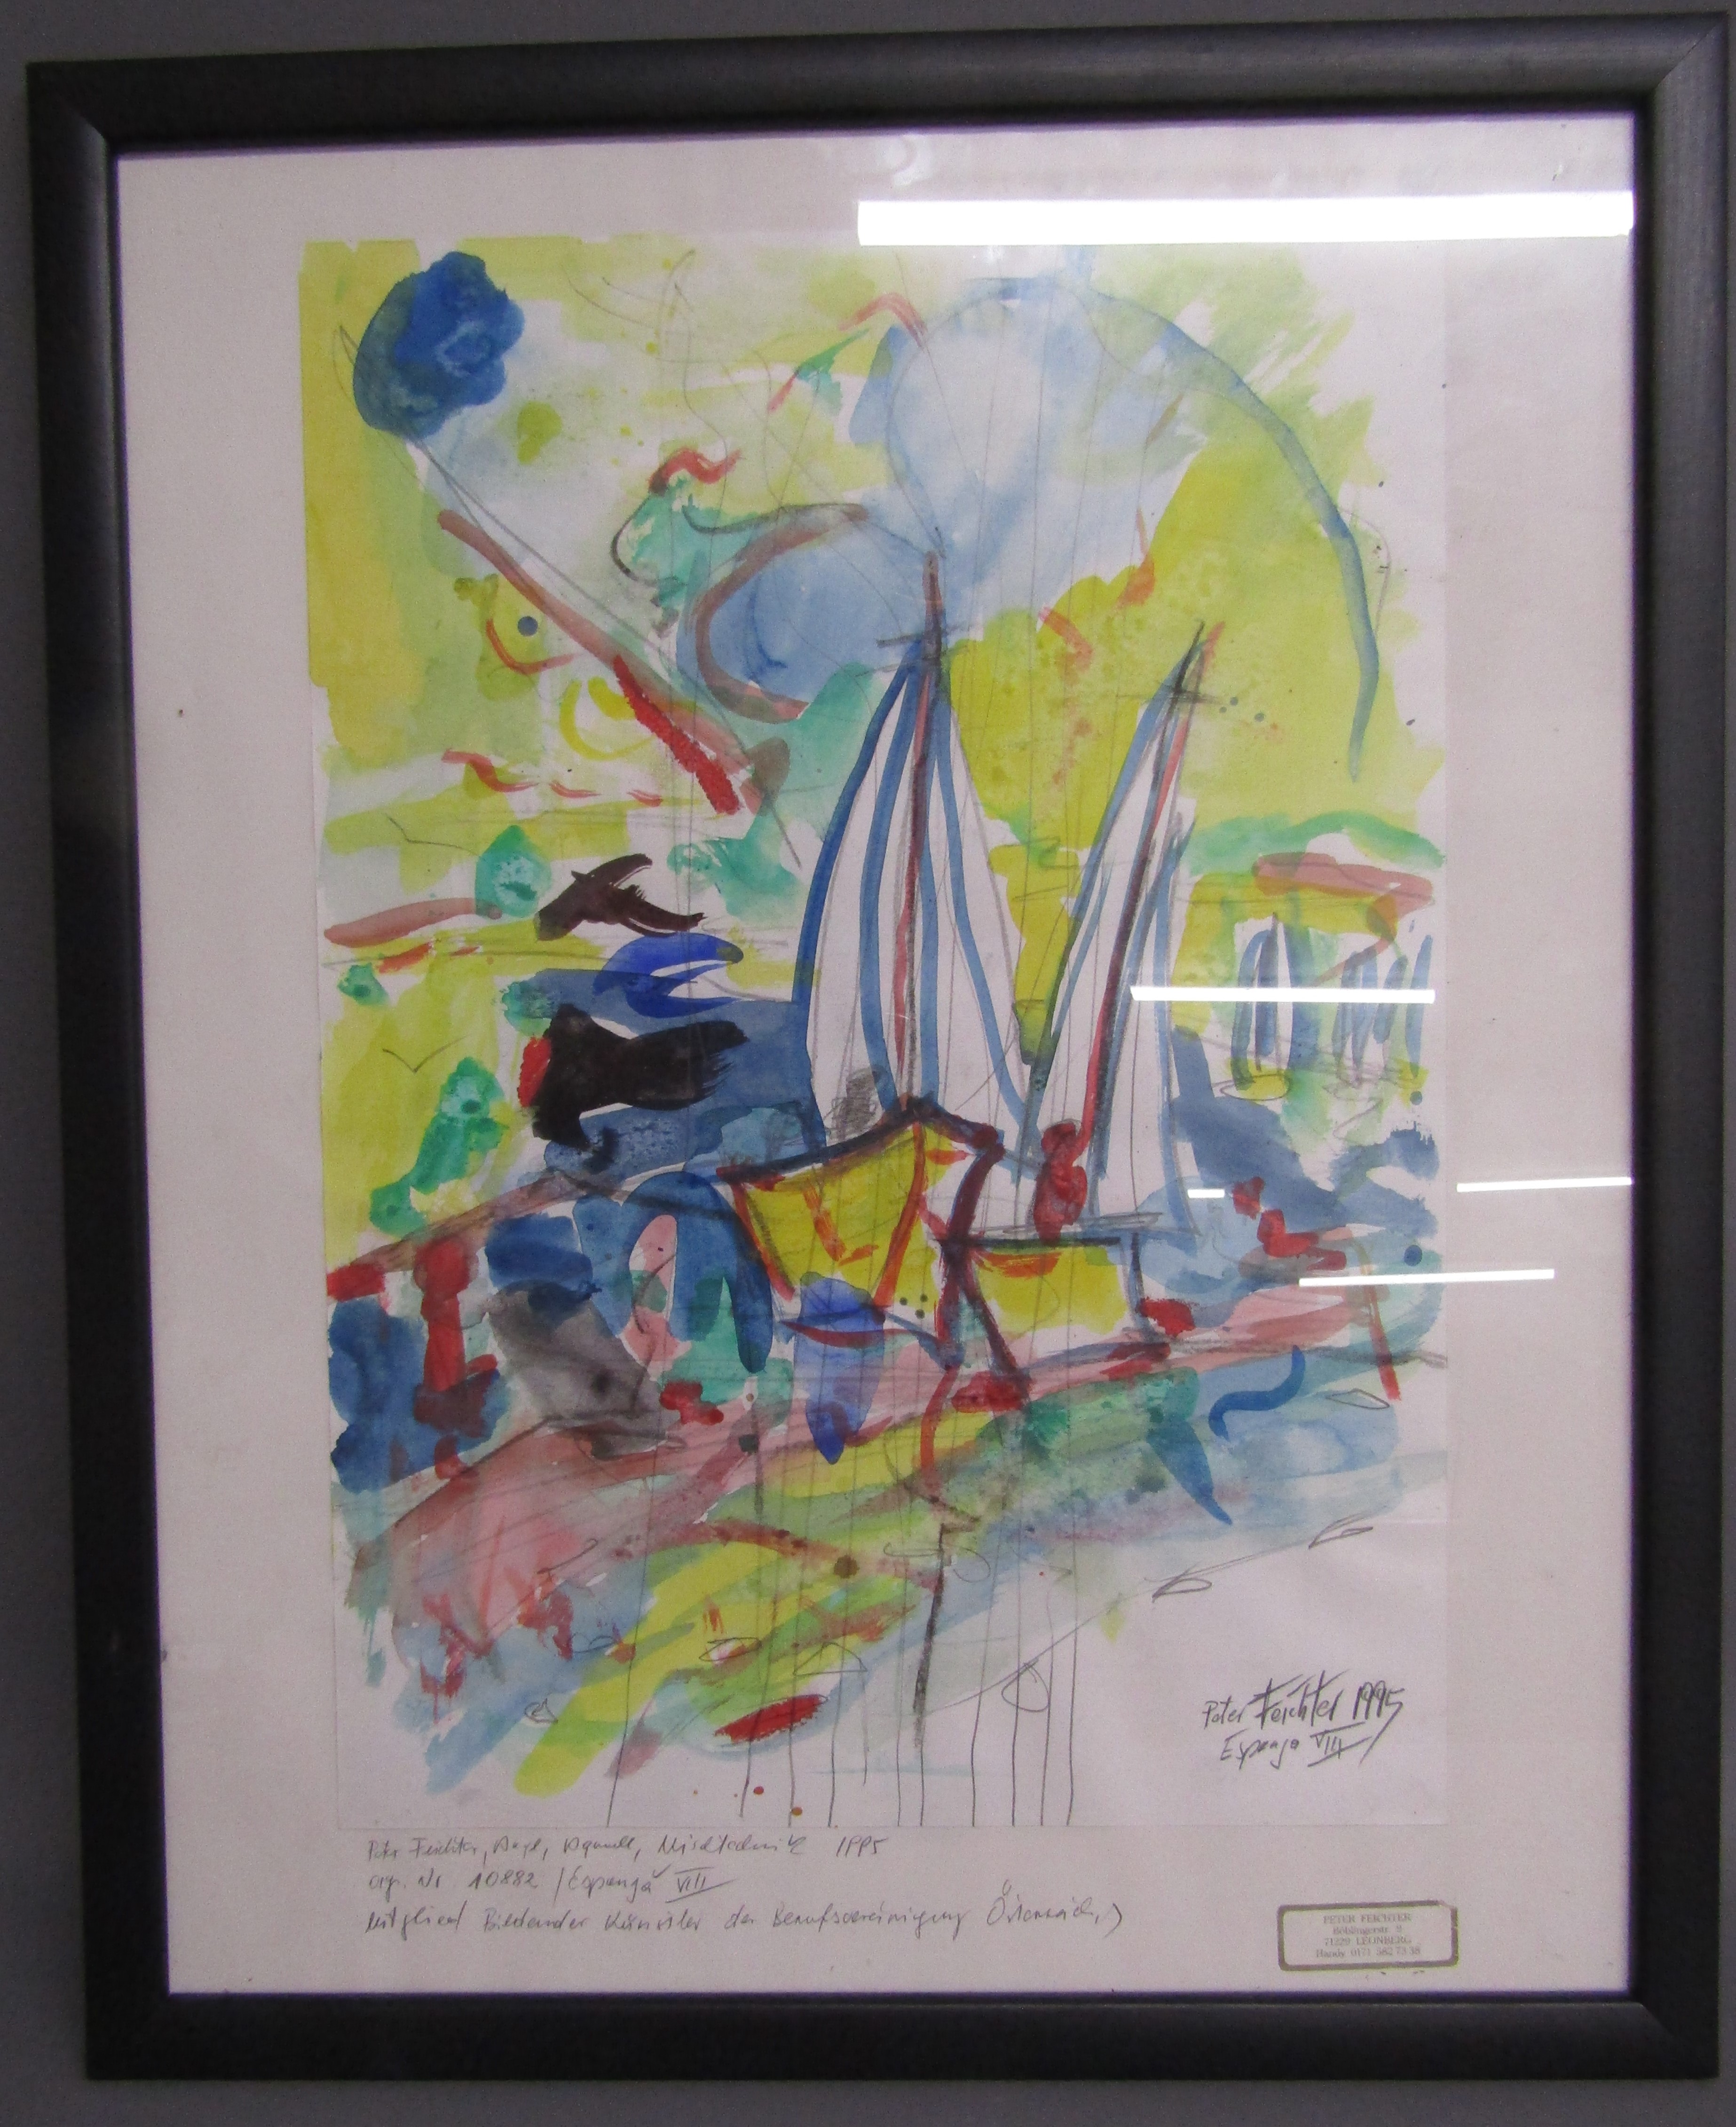 Framed Peter Feichter 1995 watercolour and pencil Spain VIII - approx. 43.5cm x 53cm - Image 2 of 6